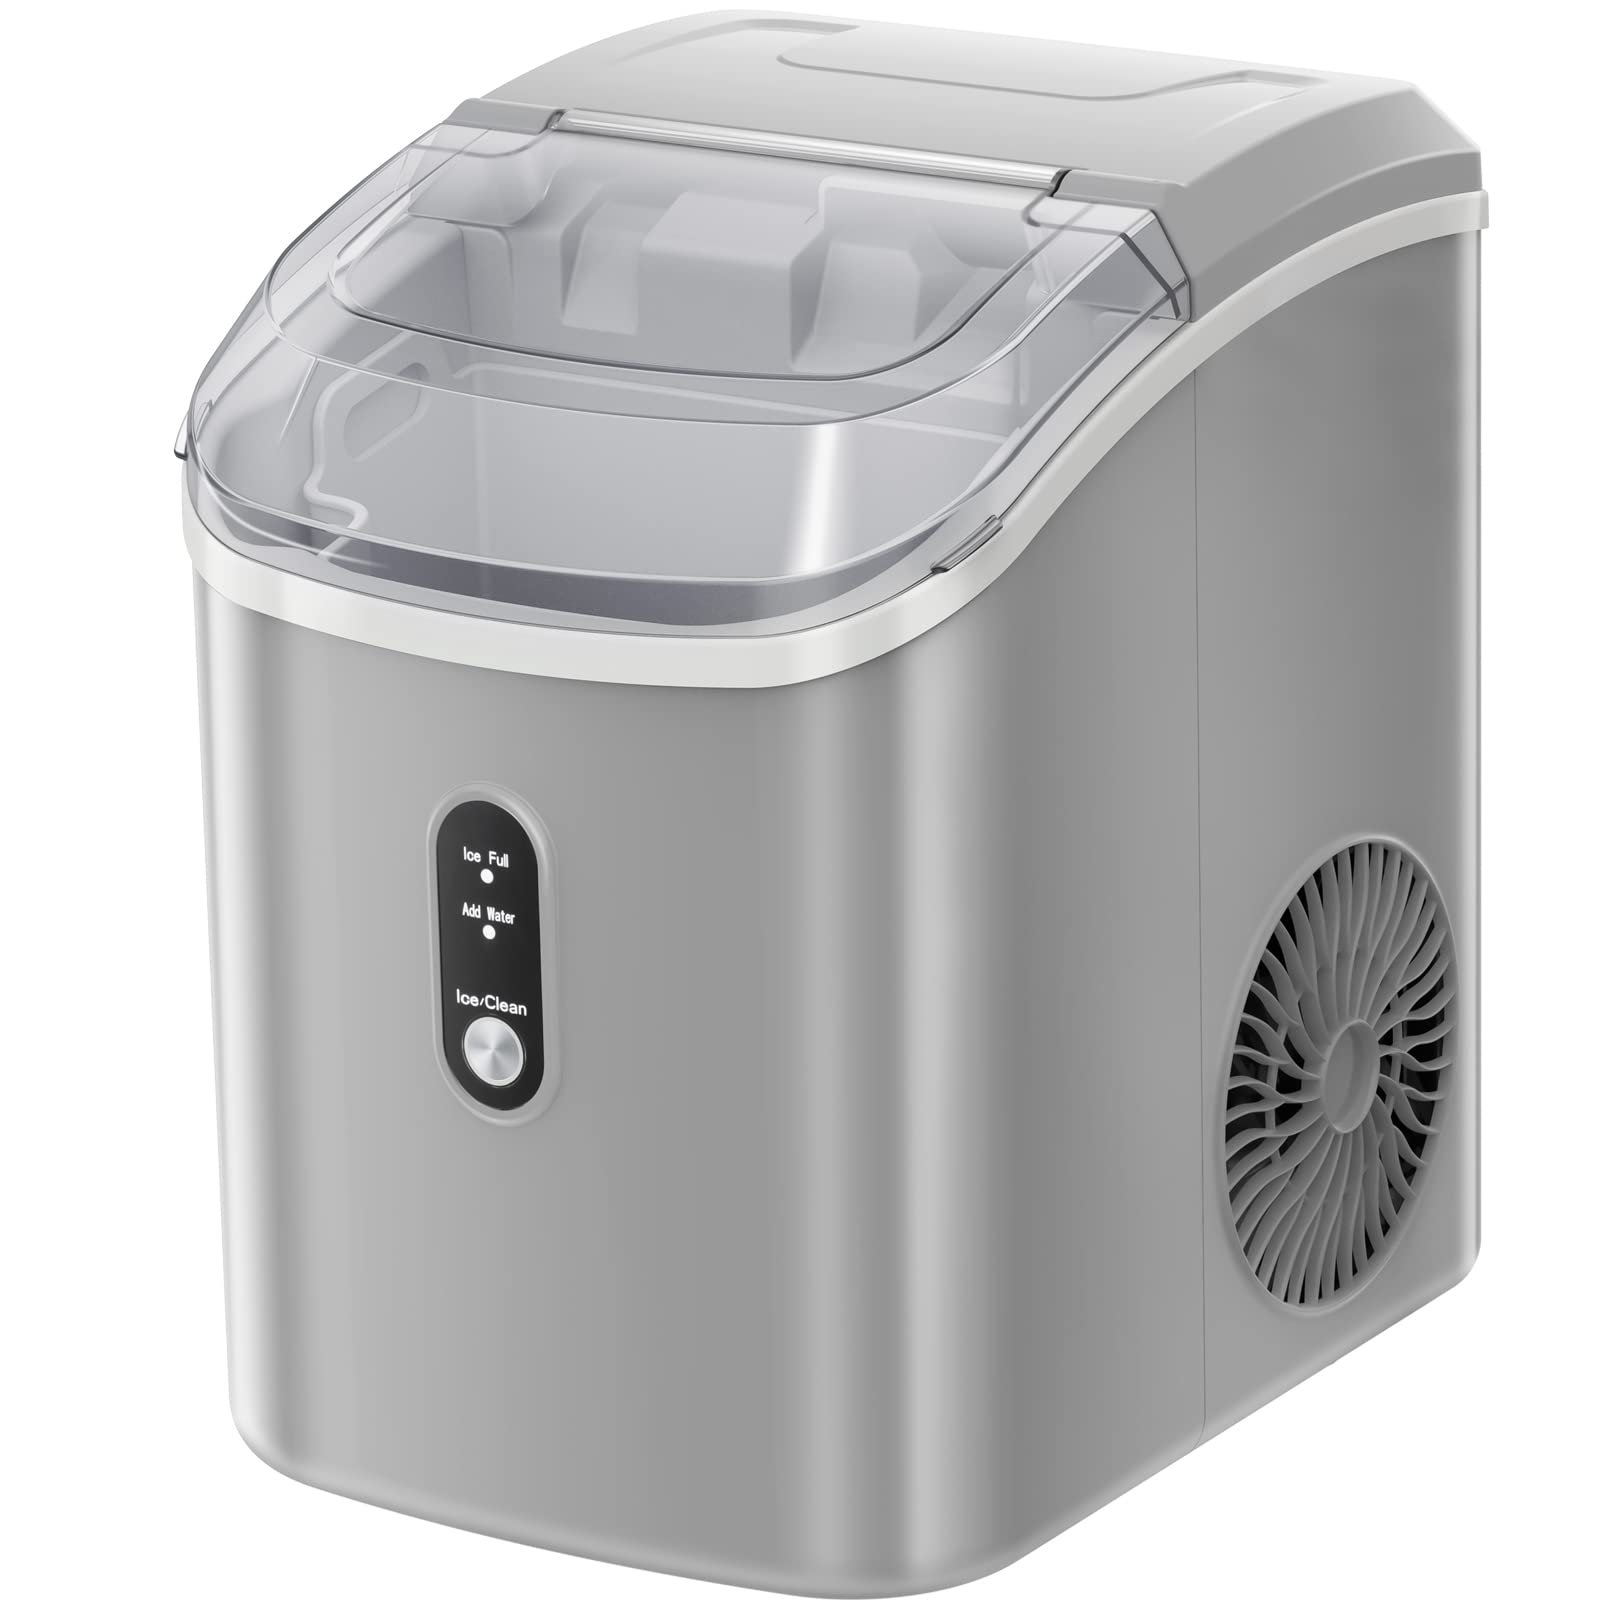  COWSAR Nugget Ice Maker Countertop, Chewable Pebble Ice  34Lbs Per Day, Crunchy Pellet Ice Cubes Maker Machine